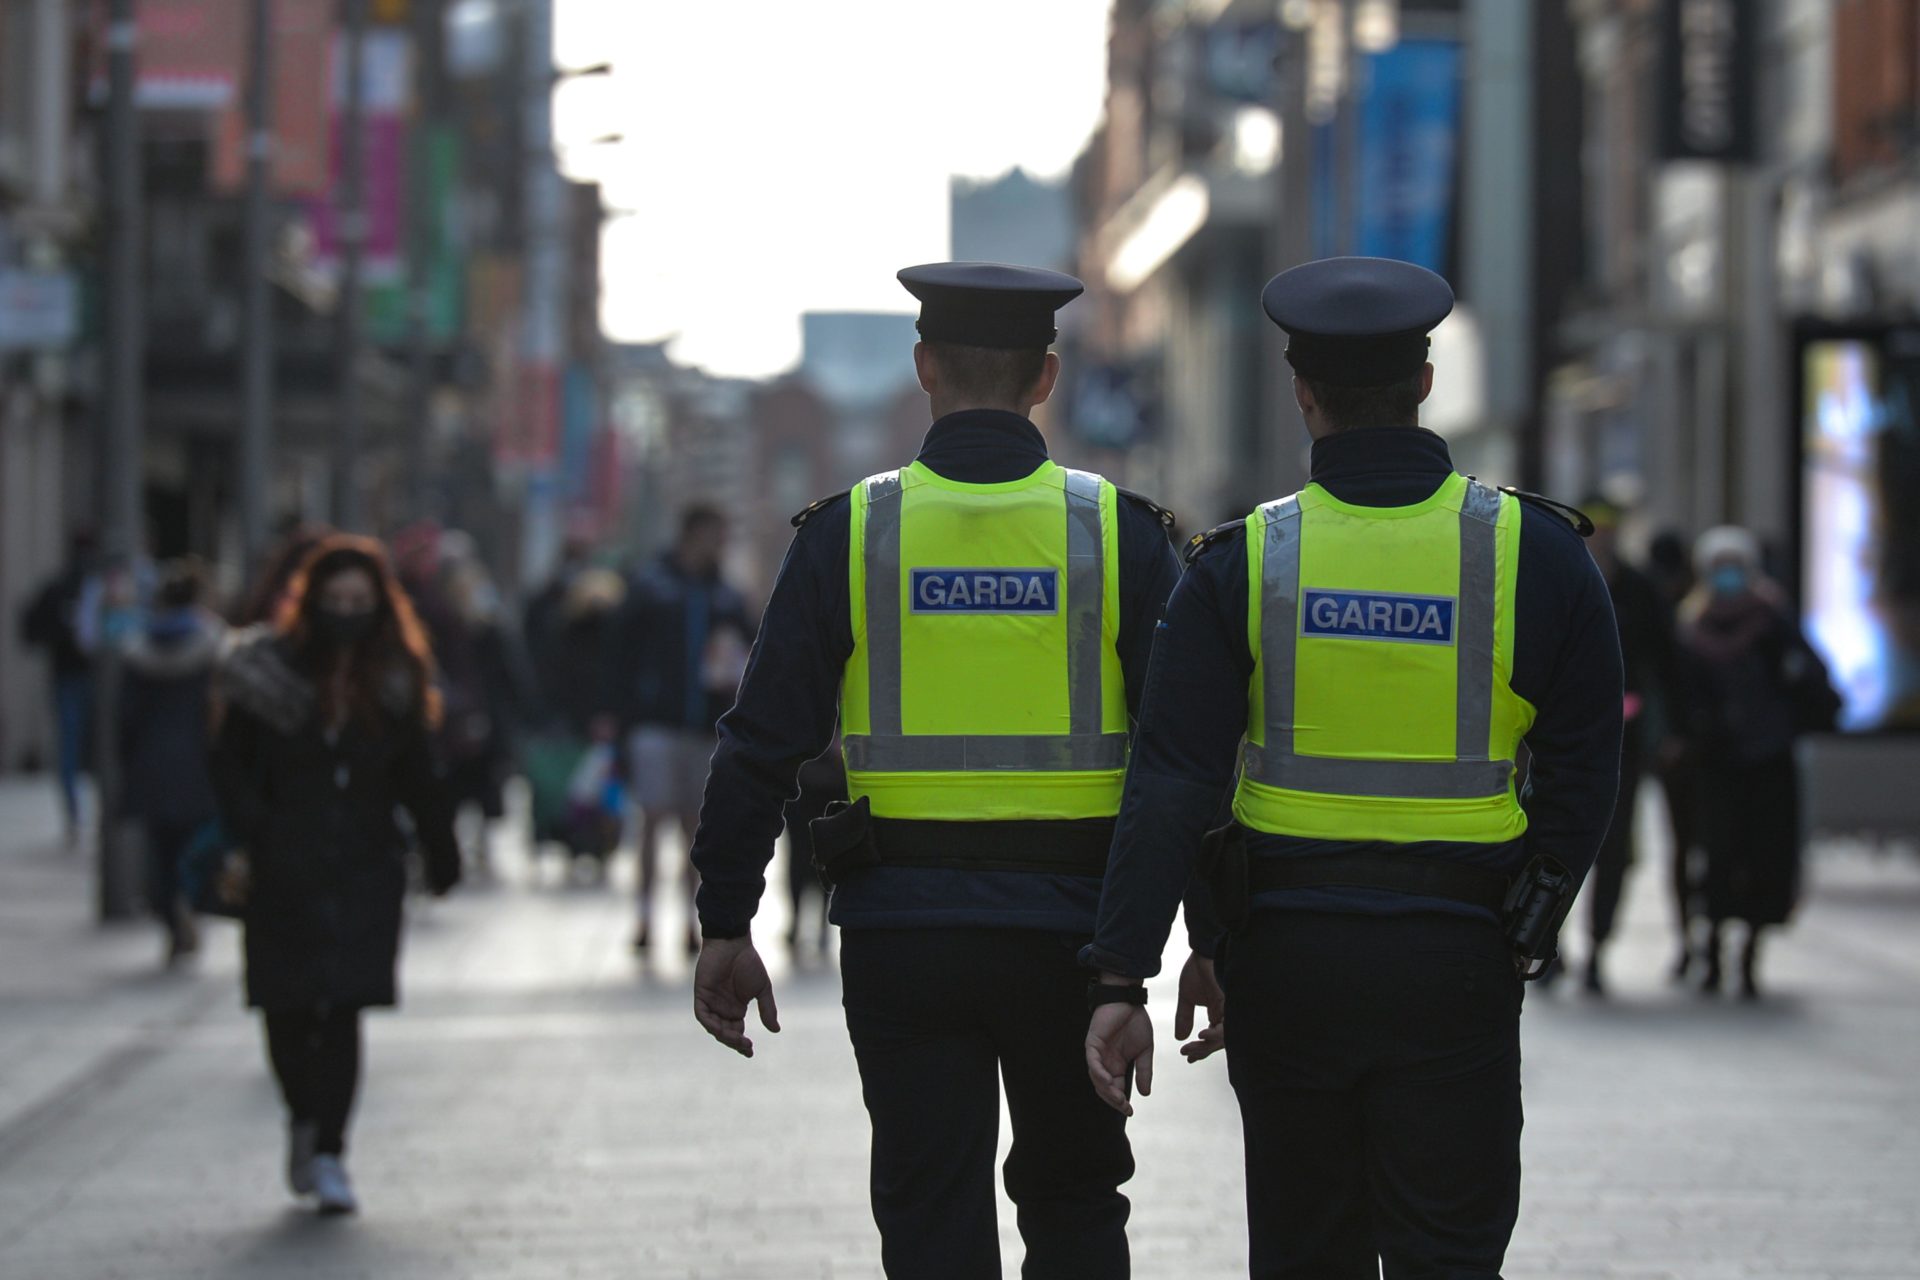 Garda body cams to be rolled out by end of this year